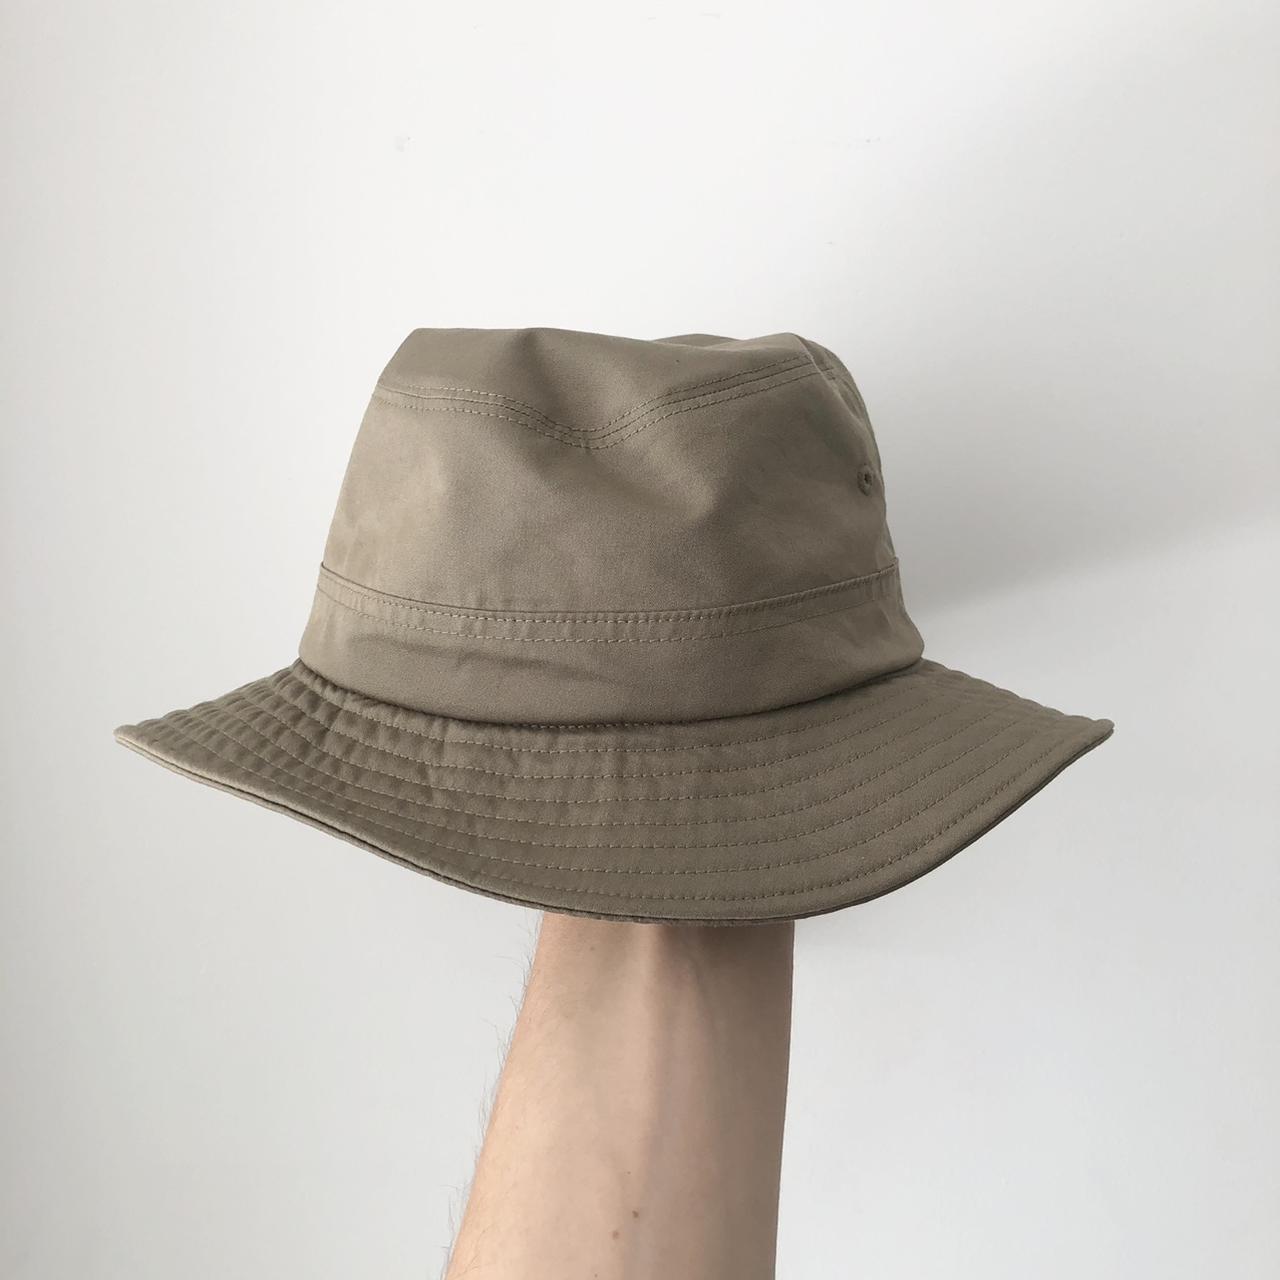 JW Anderson X Uniqlo  Washed Cotton Hat